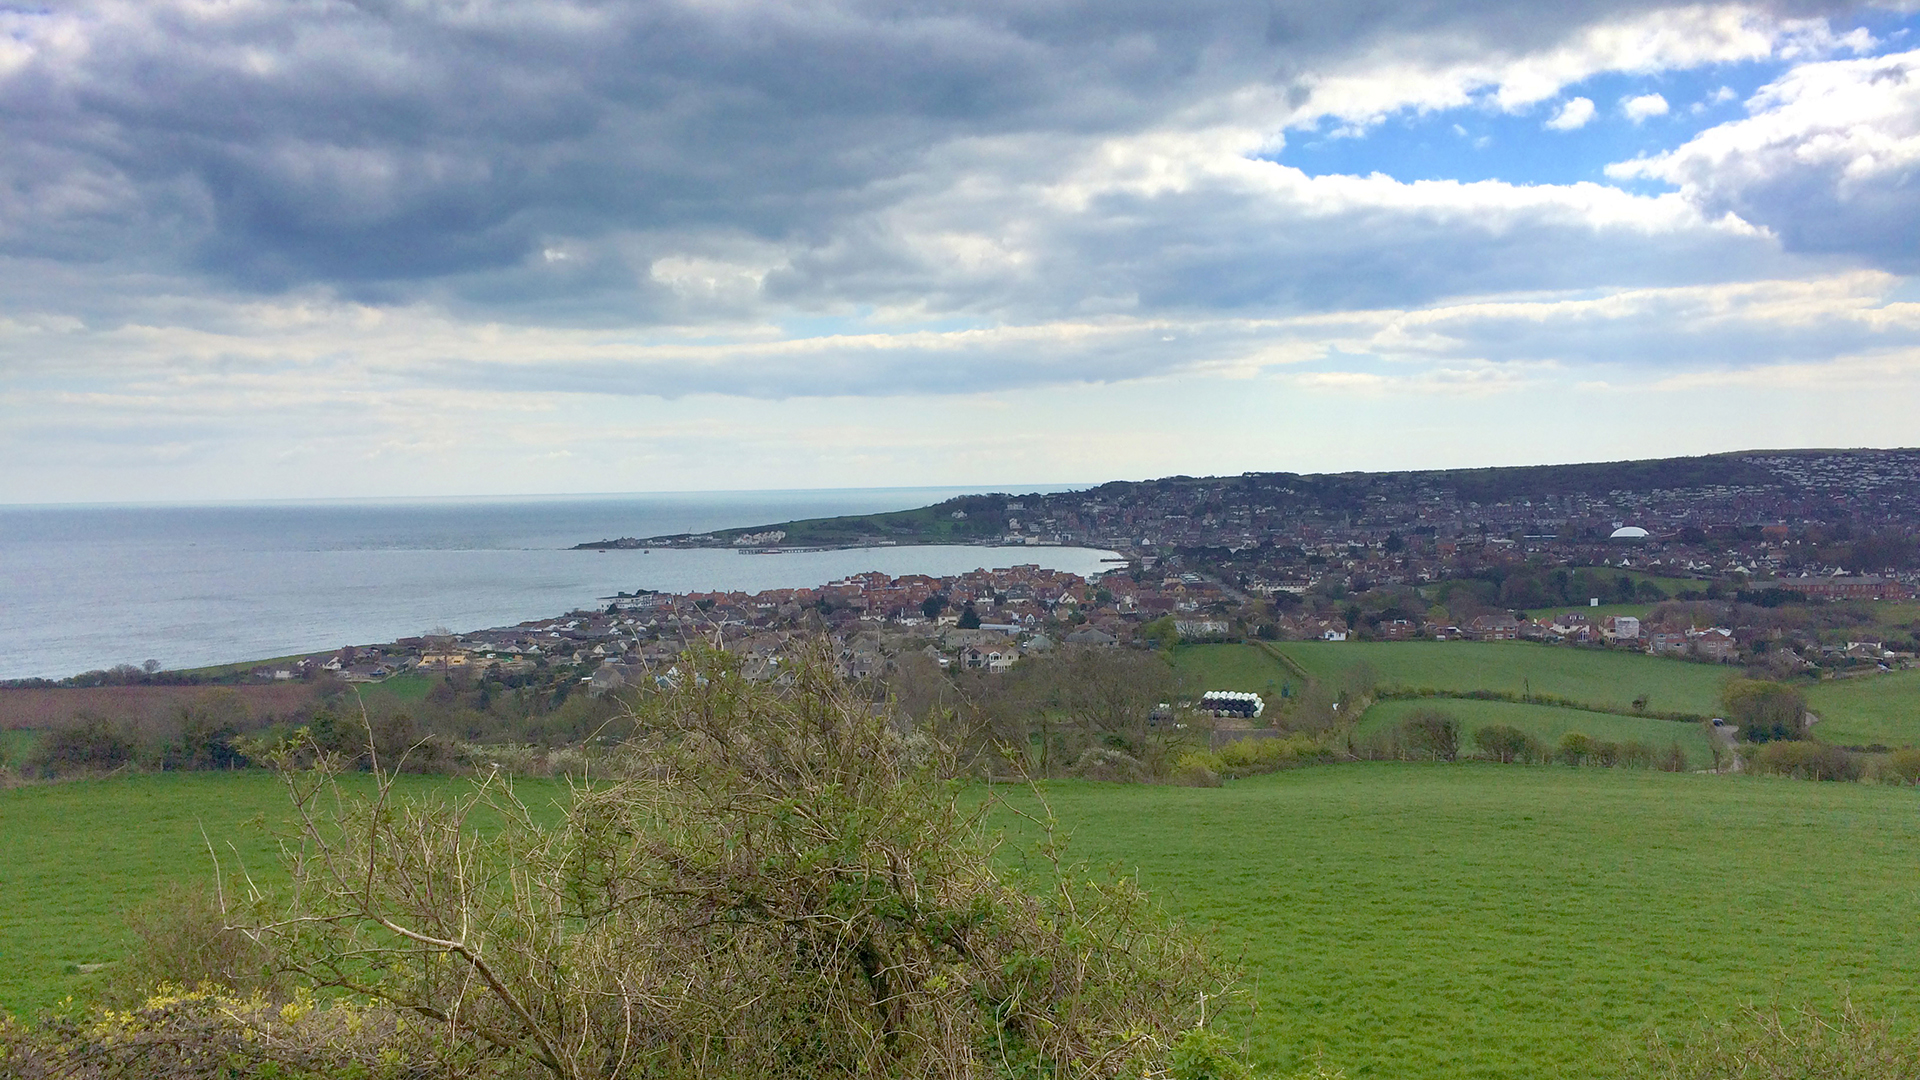 Looking our across Swanage in Dorset